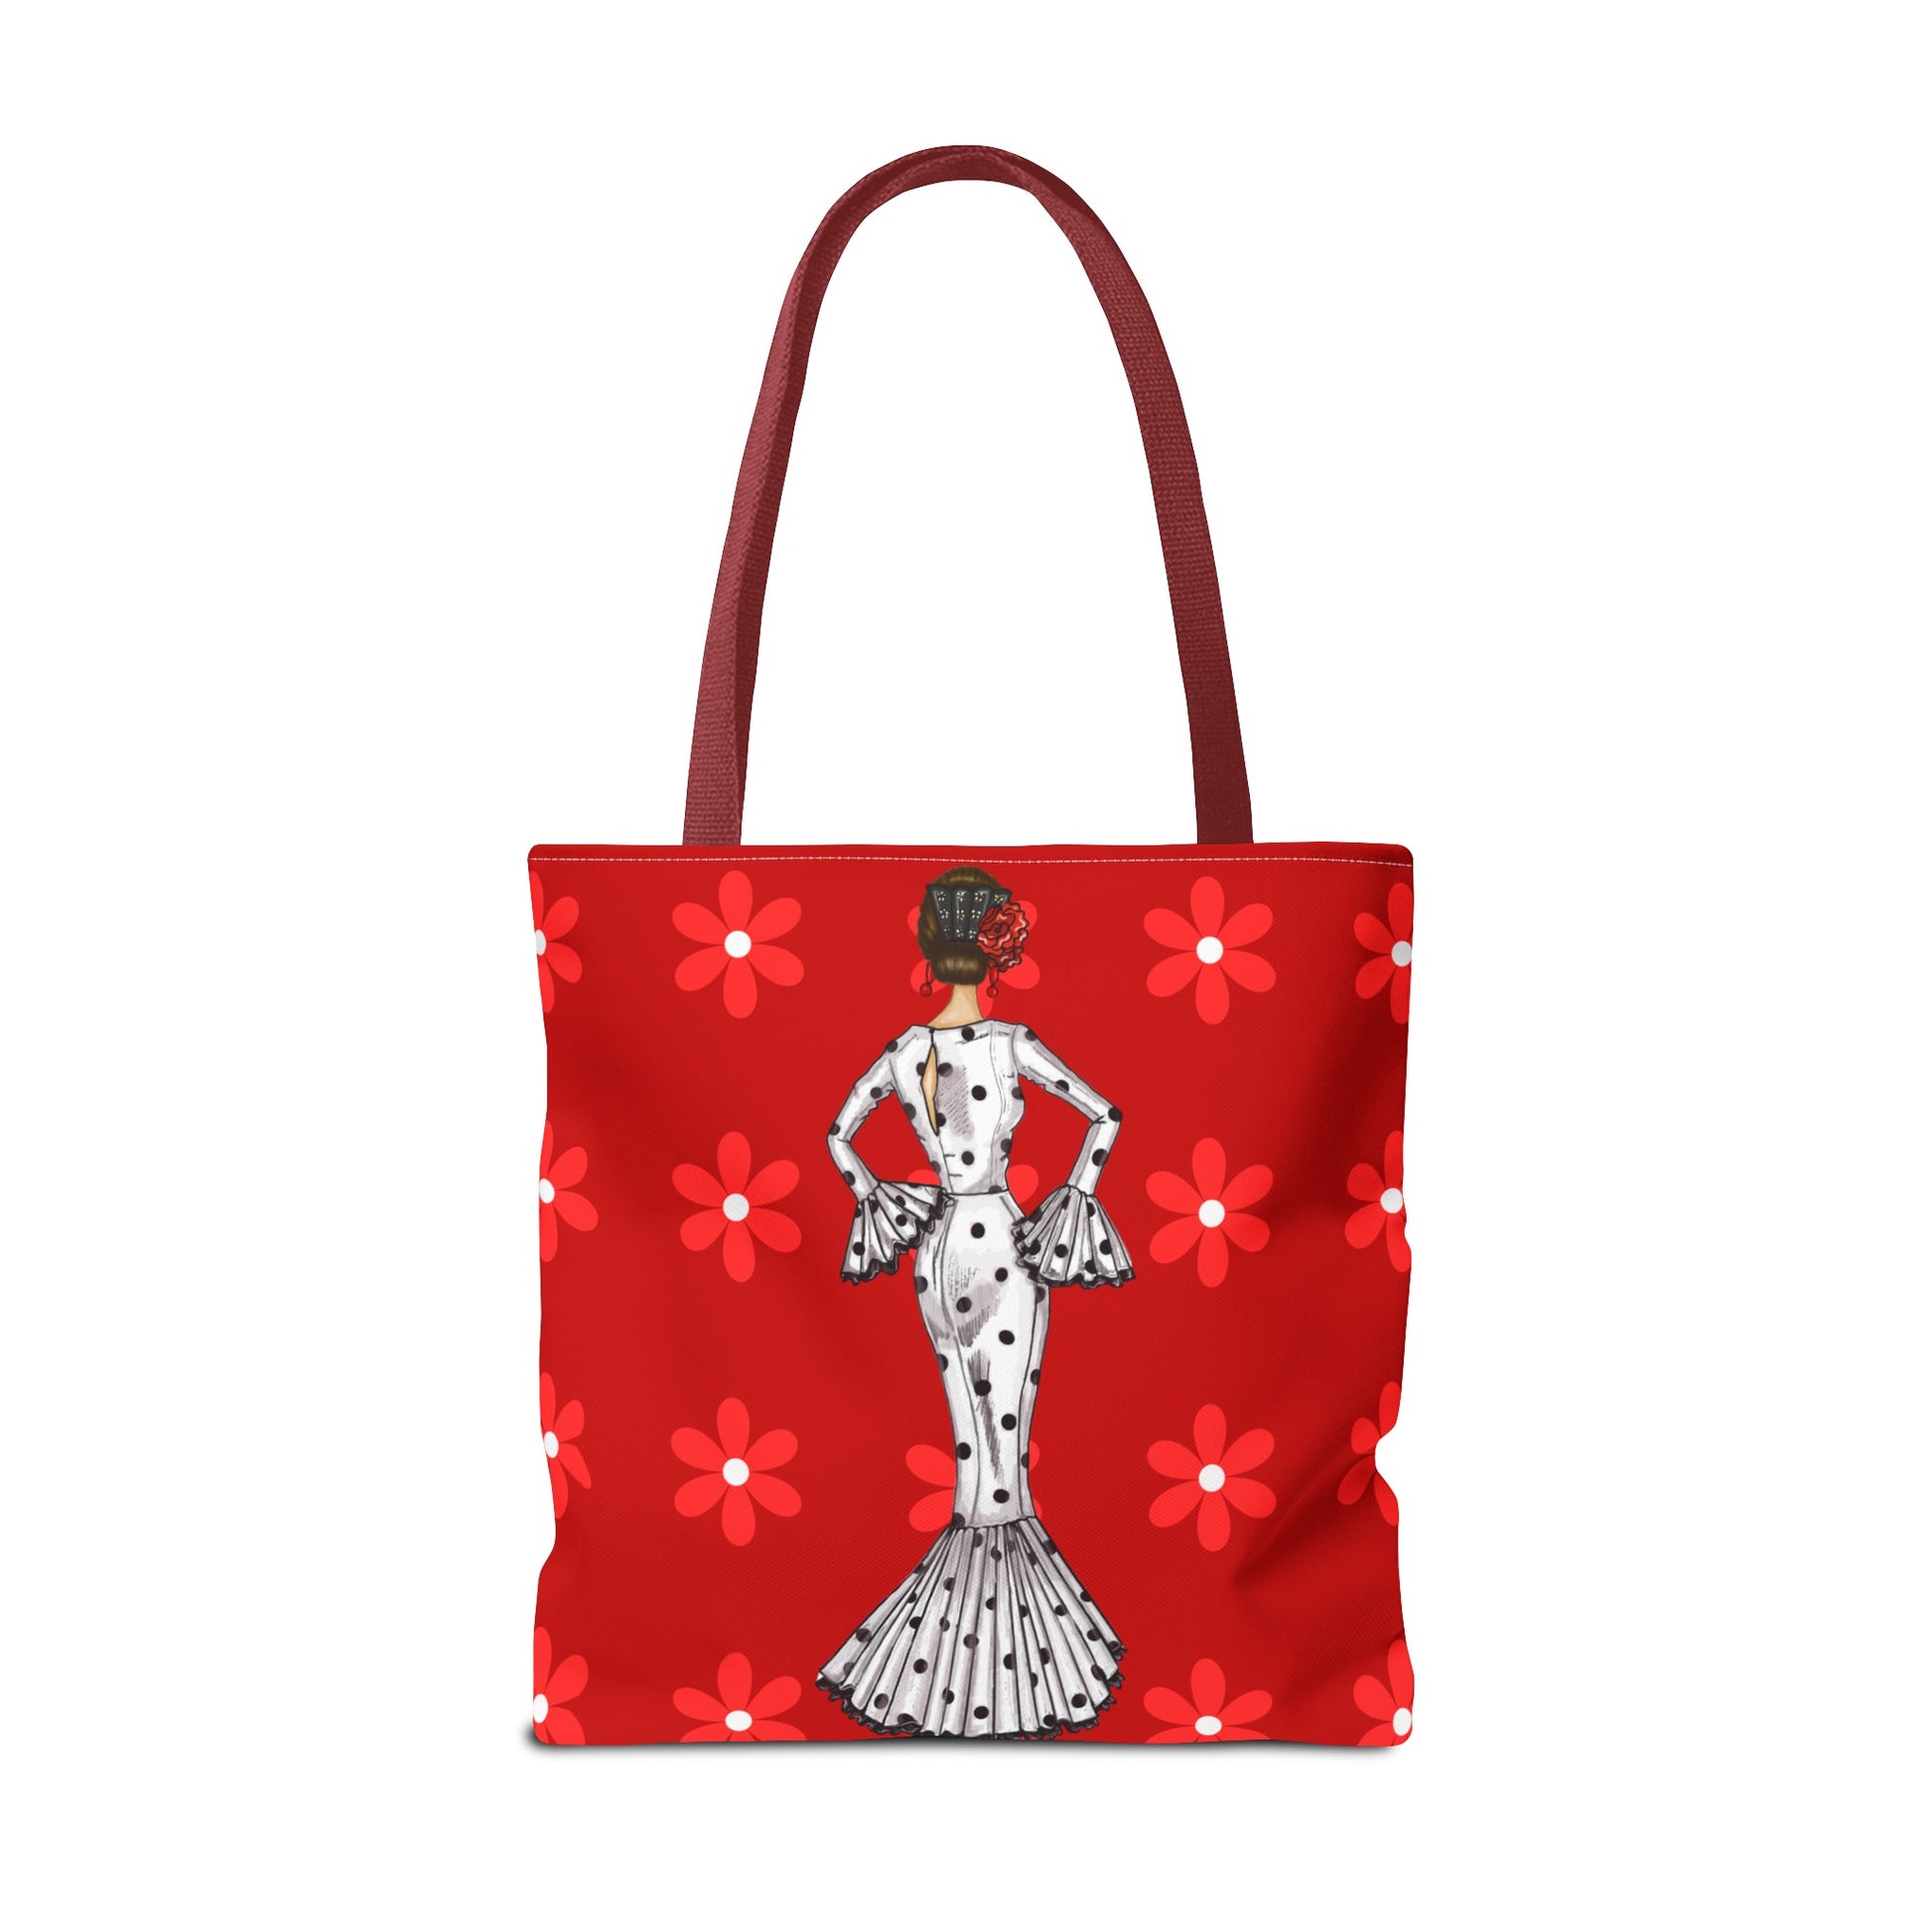 a red tote bag with a dalmatian dog on it